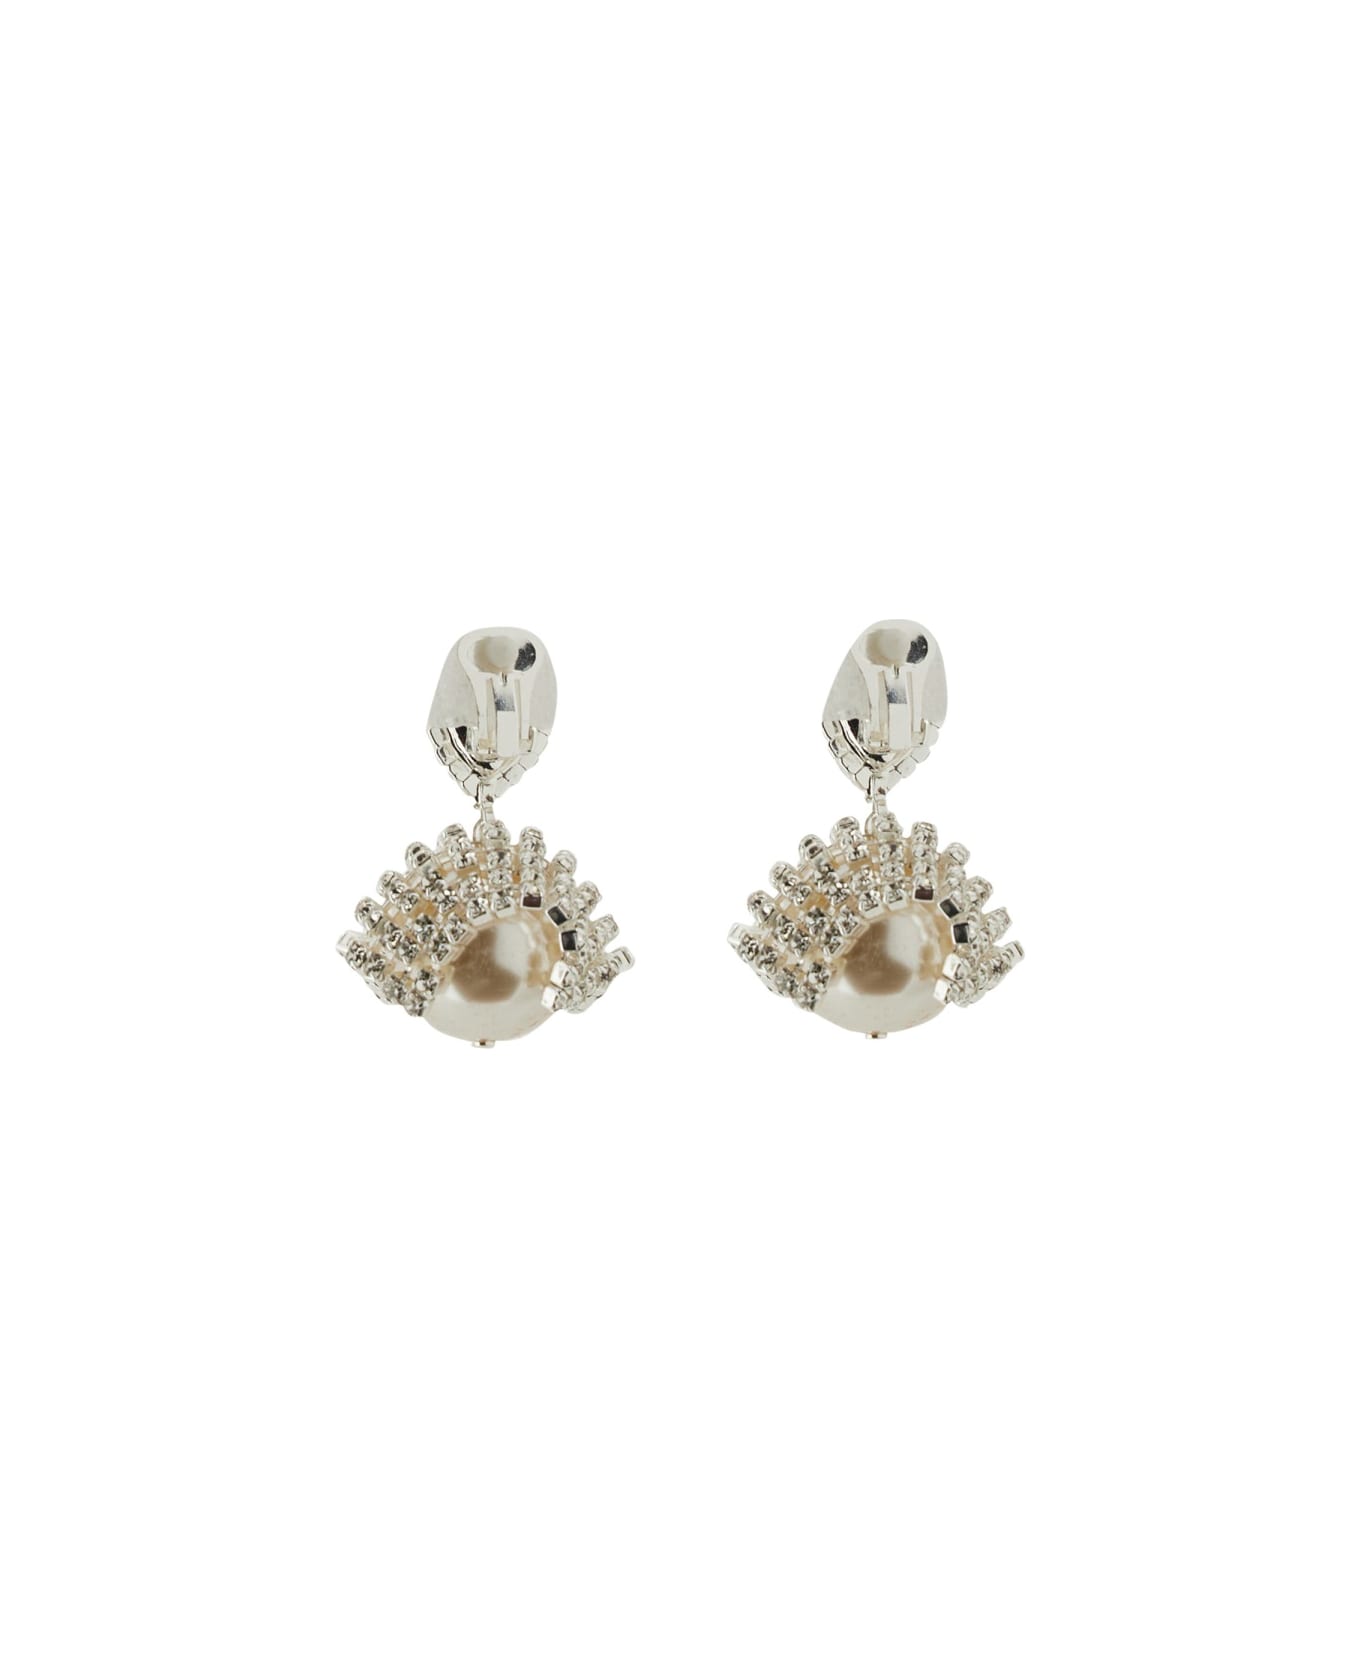 Magda Butrym Earrings With Pearls - SILVER